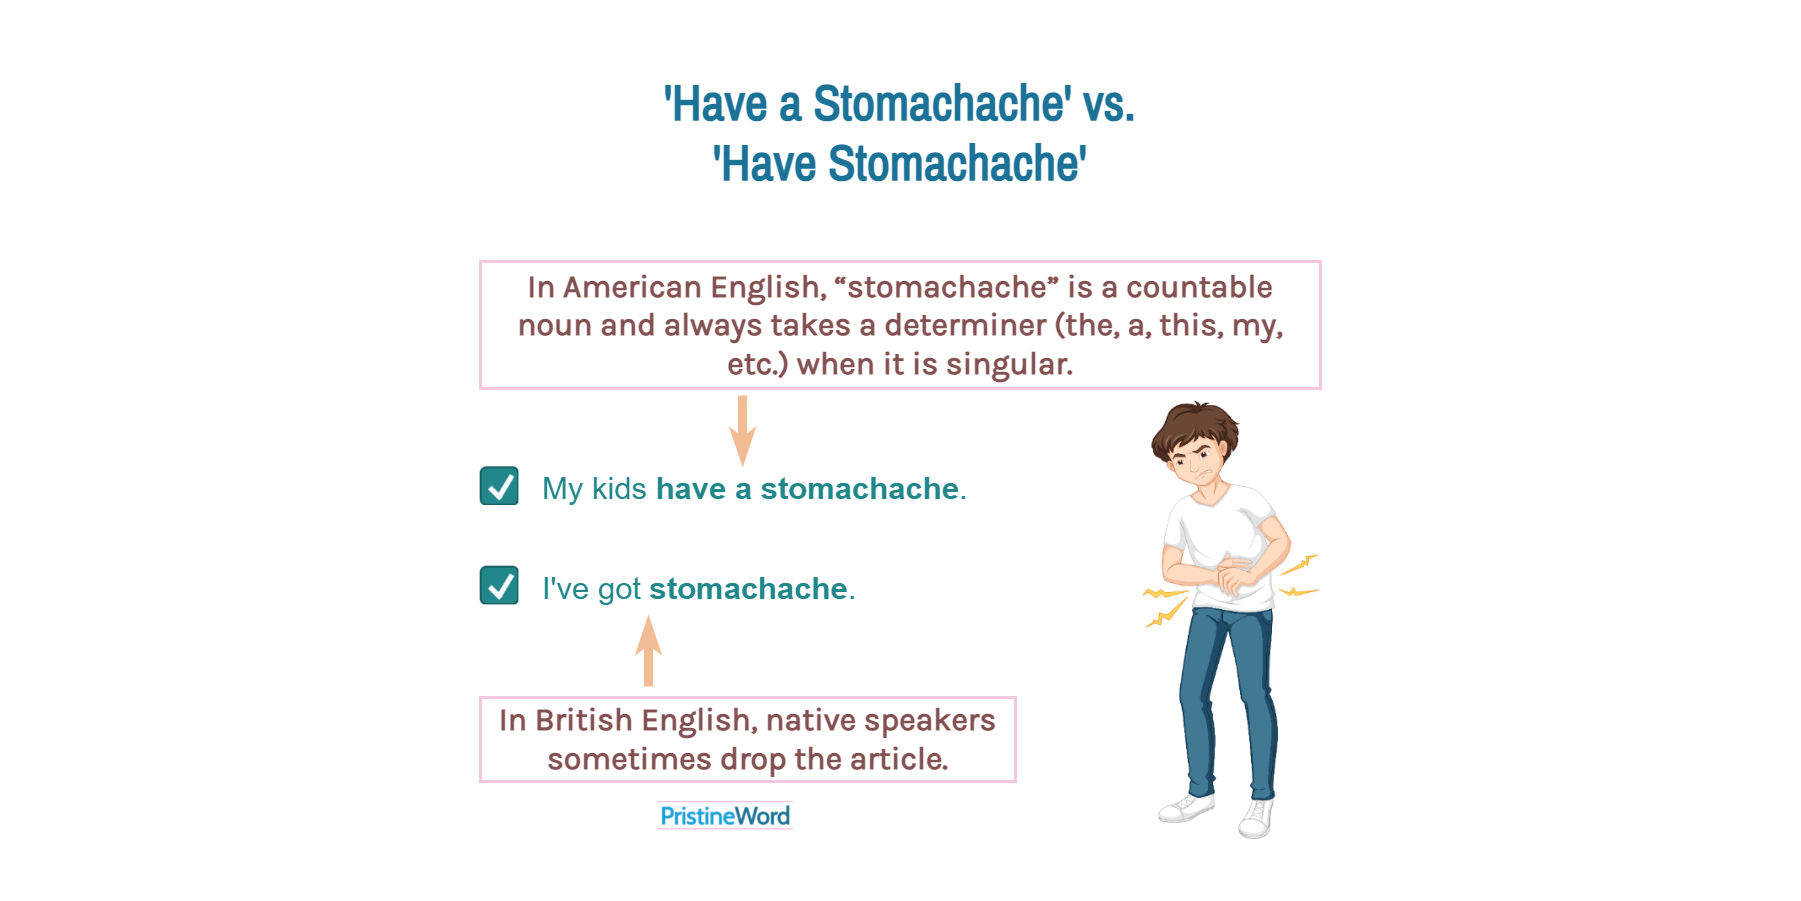 Have a Stomachache or Have Stomachache. Which is Correct?